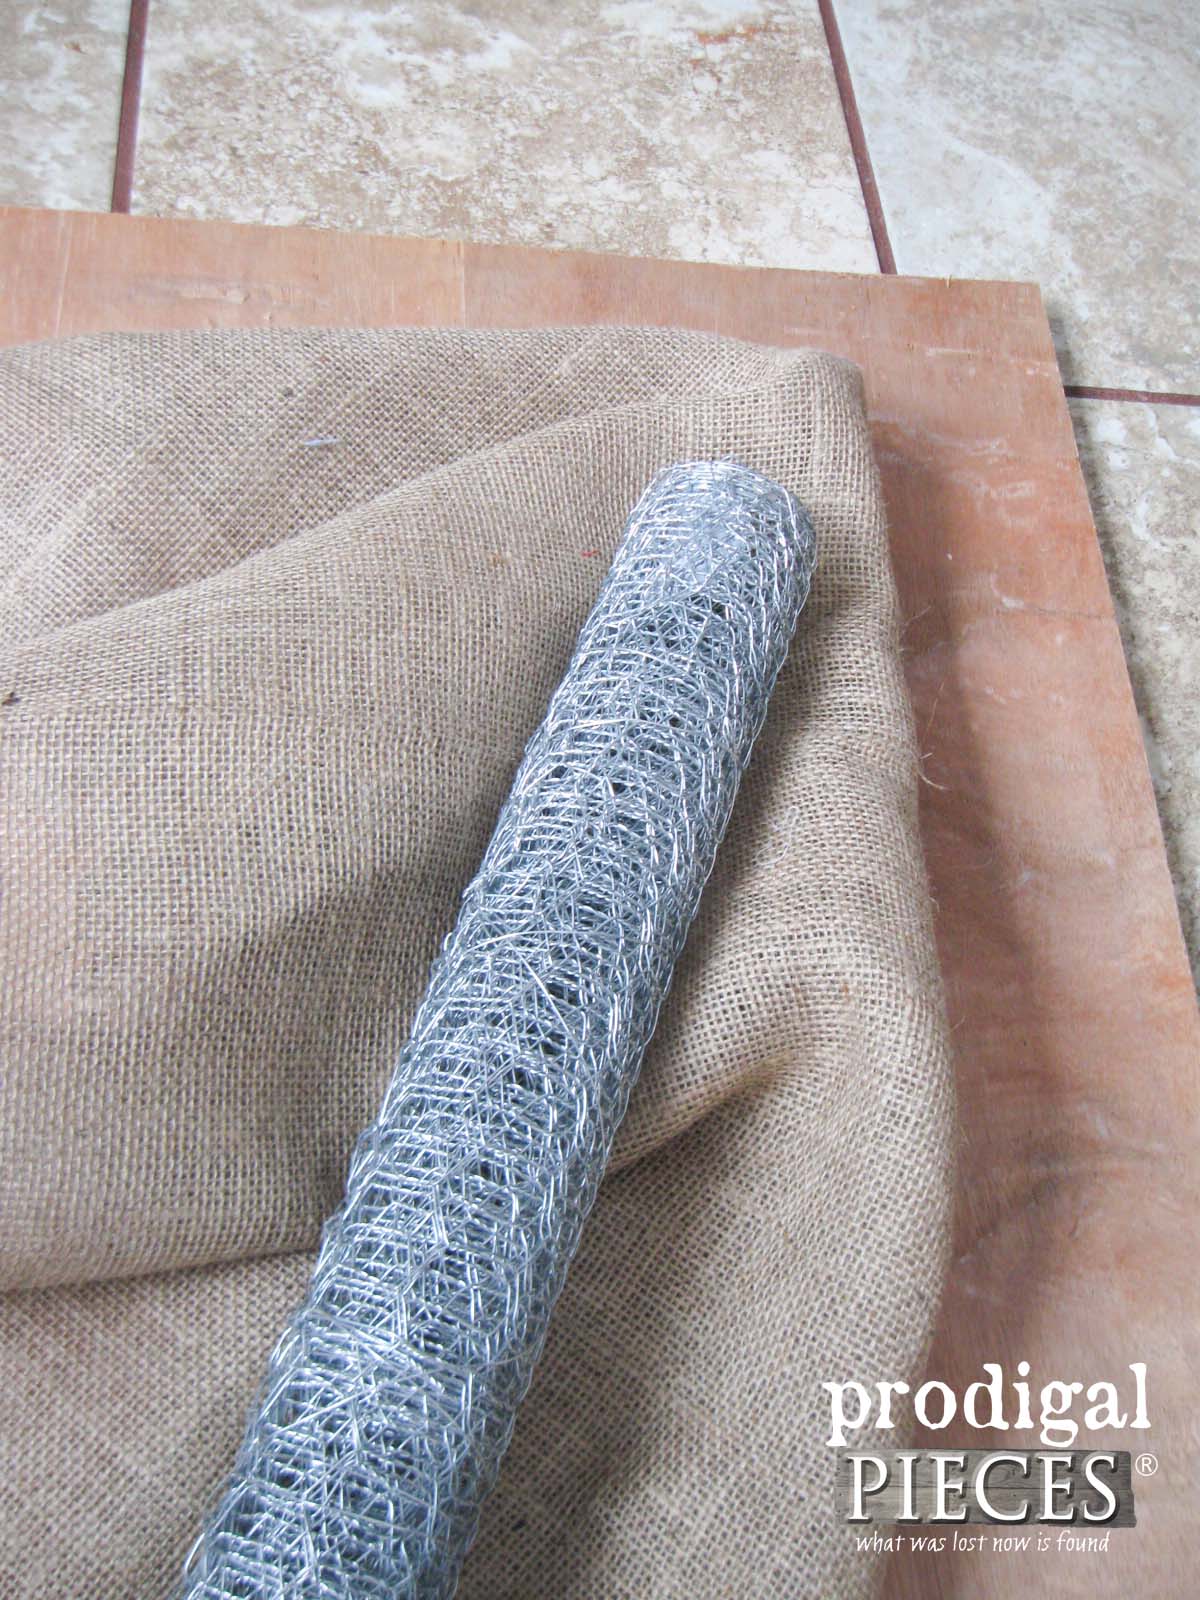 Burlap and Chicken Wire for Repurposed Wall Art by Prodigal Pieces | prodigalpieces.com